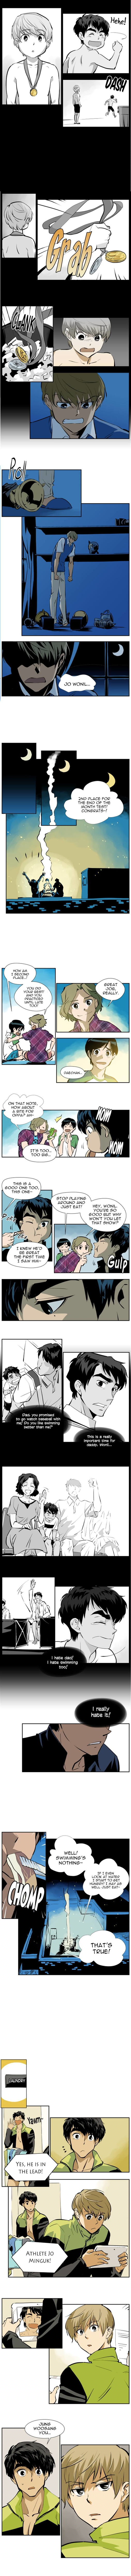 No Breathing - Page 3